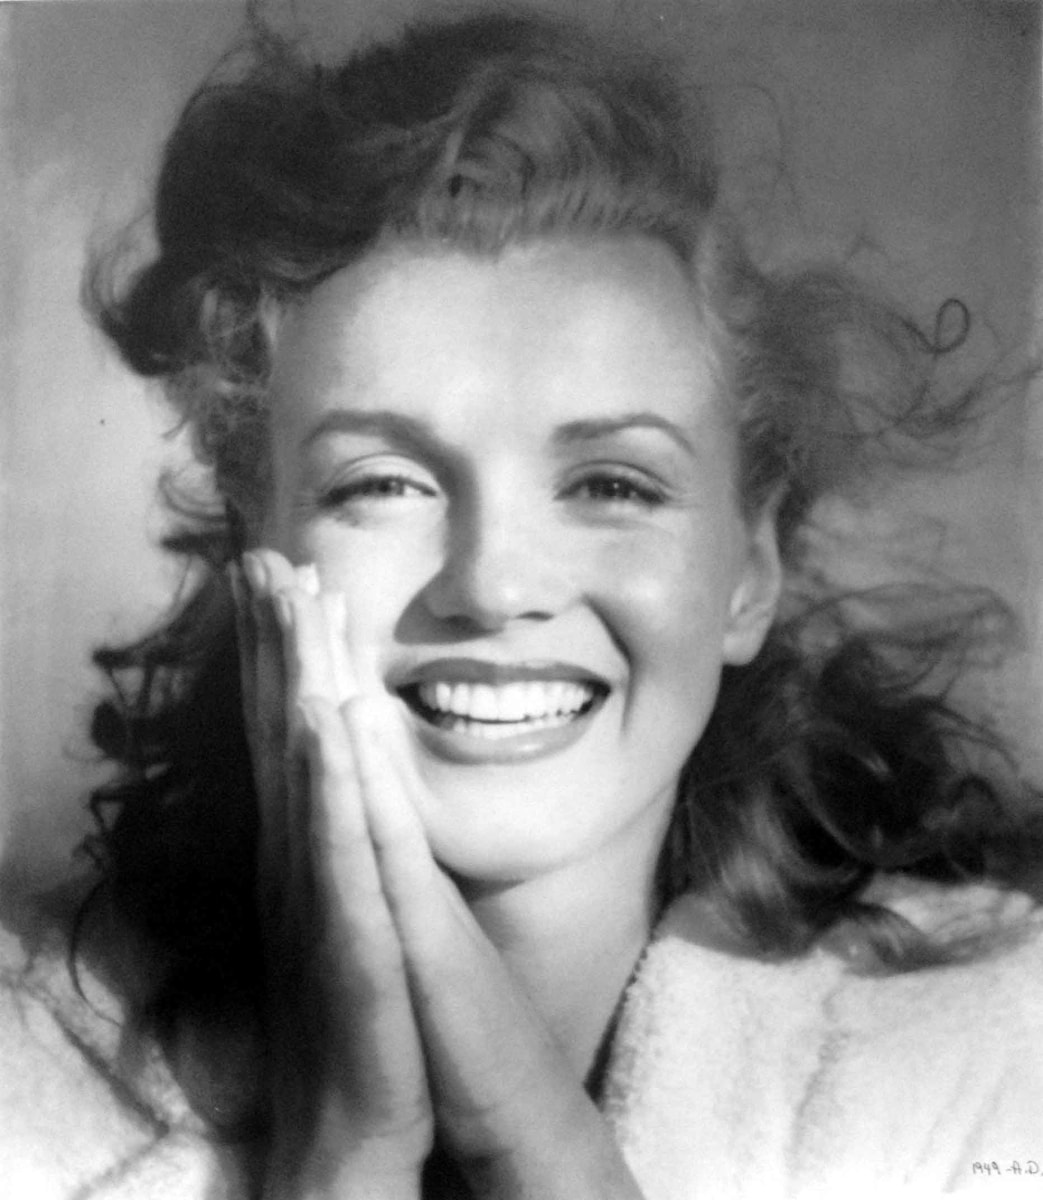 Andre de Dienes Marilyn and California Girls - Exhibitions picture